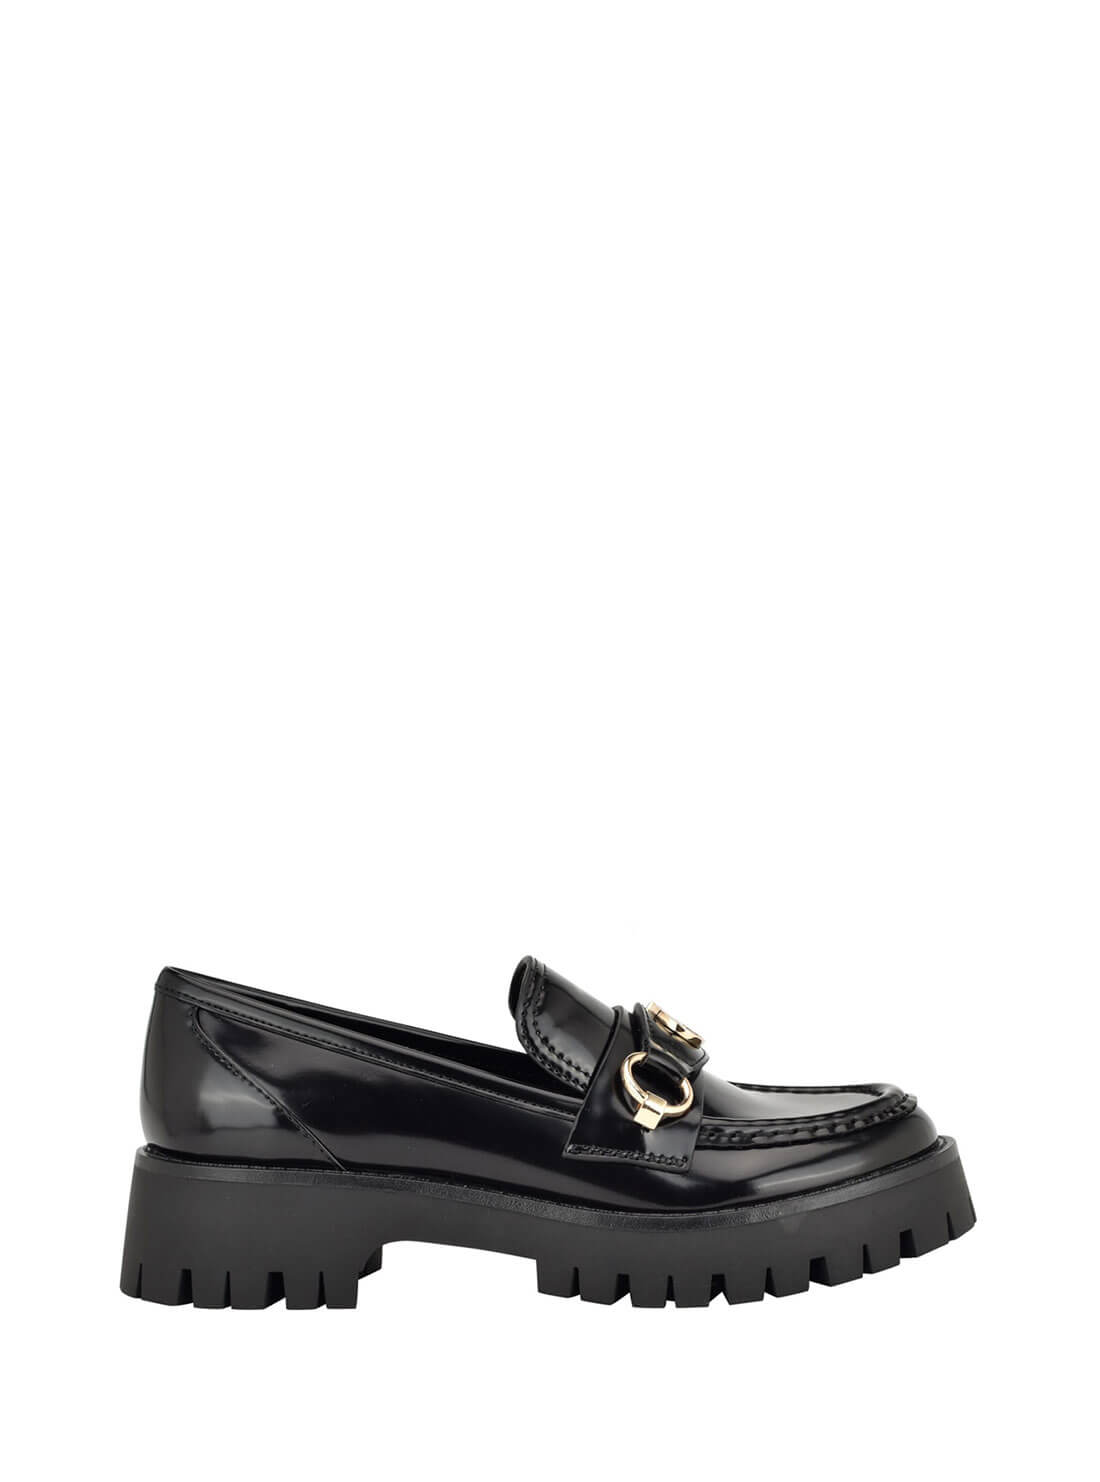 Black Almost Loafers | GUESS Women's Shoes | side view